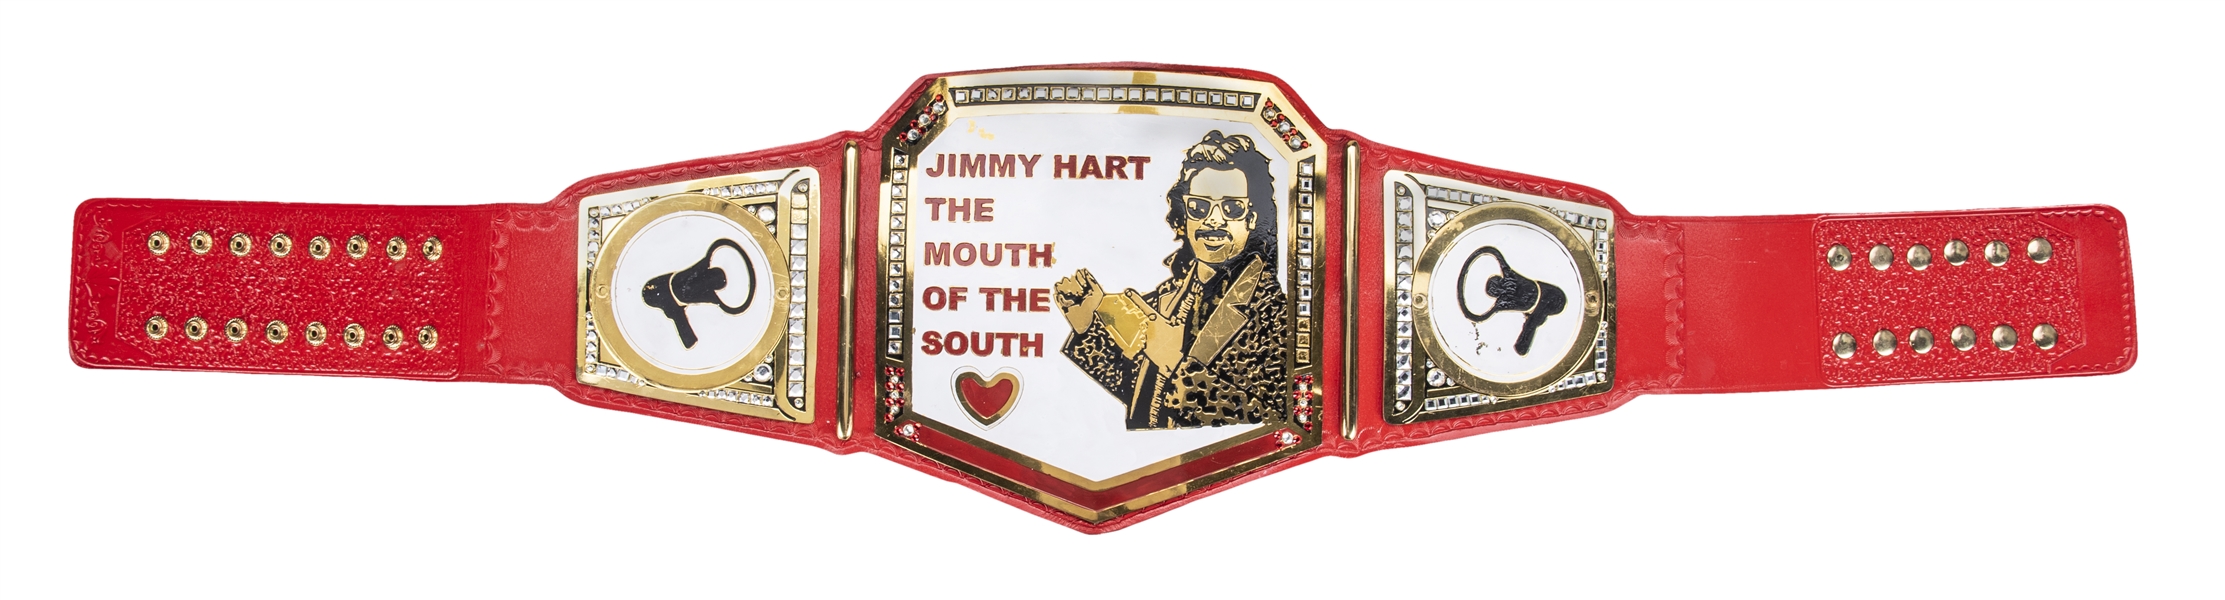 Robkes - The Mouth of the South Wrestling legend Jimmy